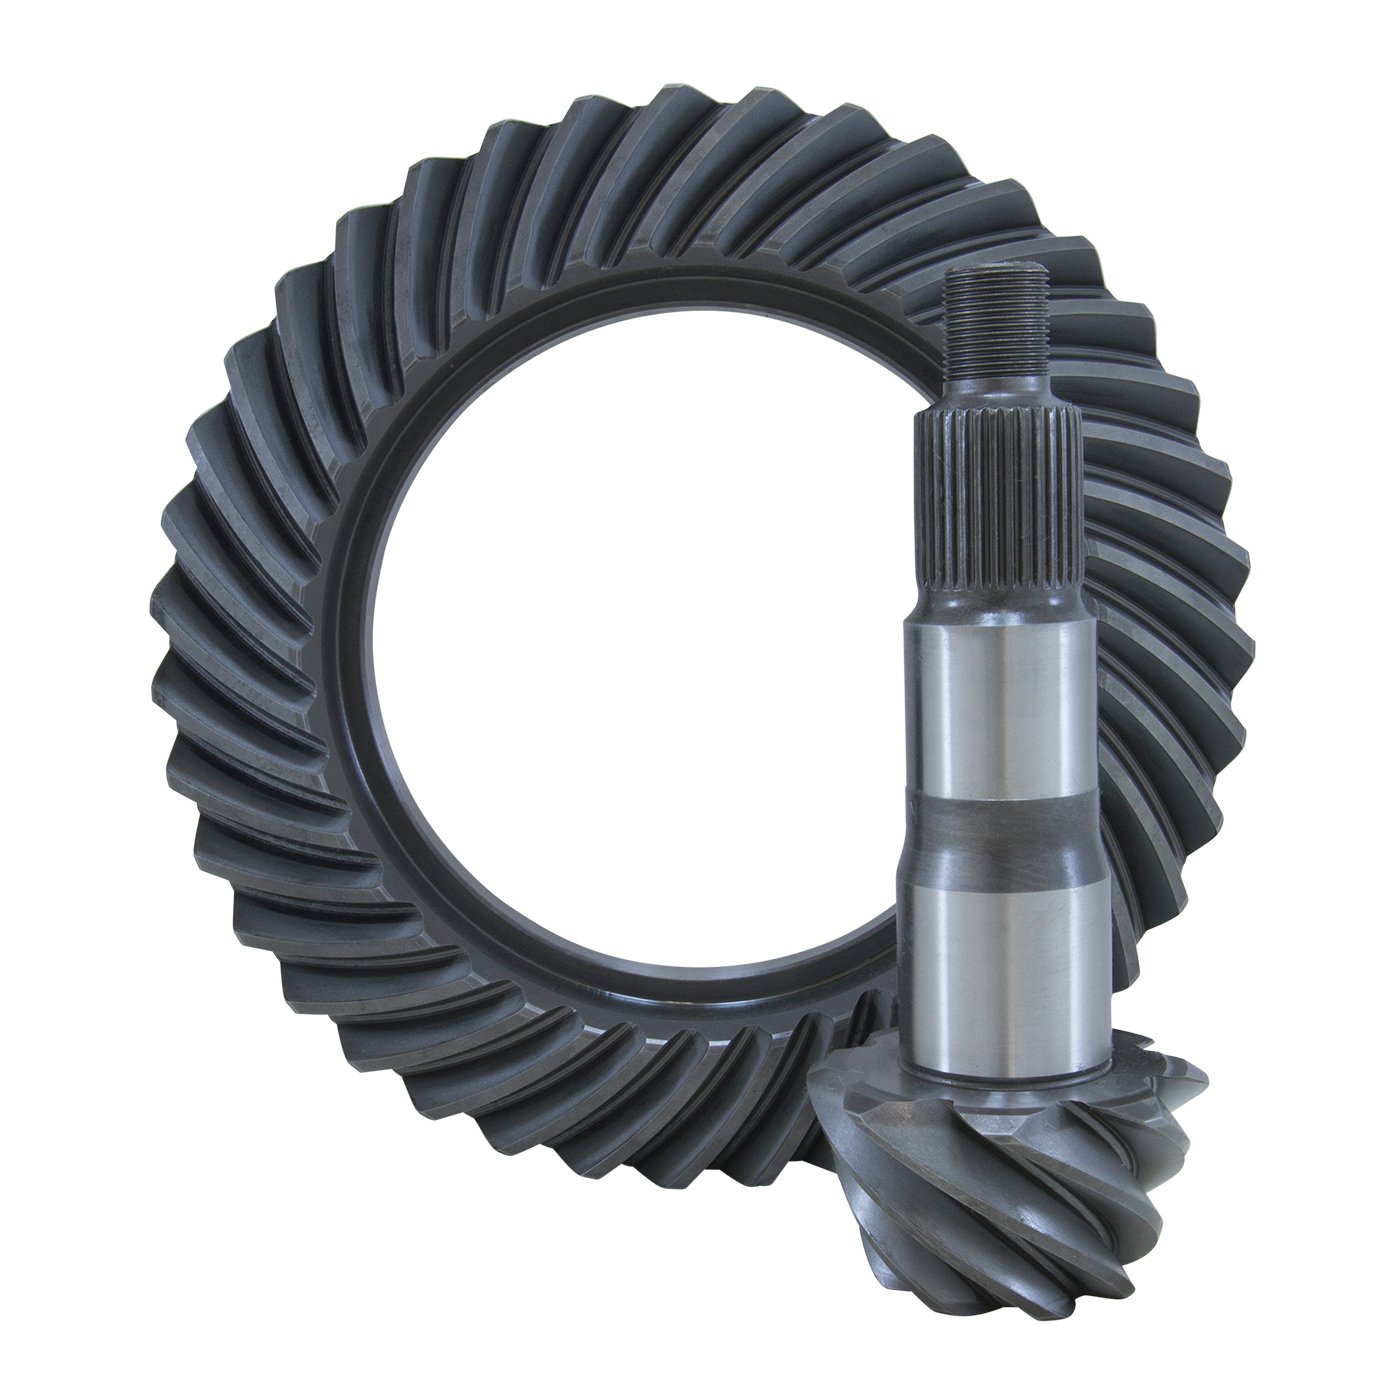 USA Standard 36437 Ring & Pinion Gear Set, For 2007+ Toyota Tundra 10.5 in. W/5.7L, 4.88